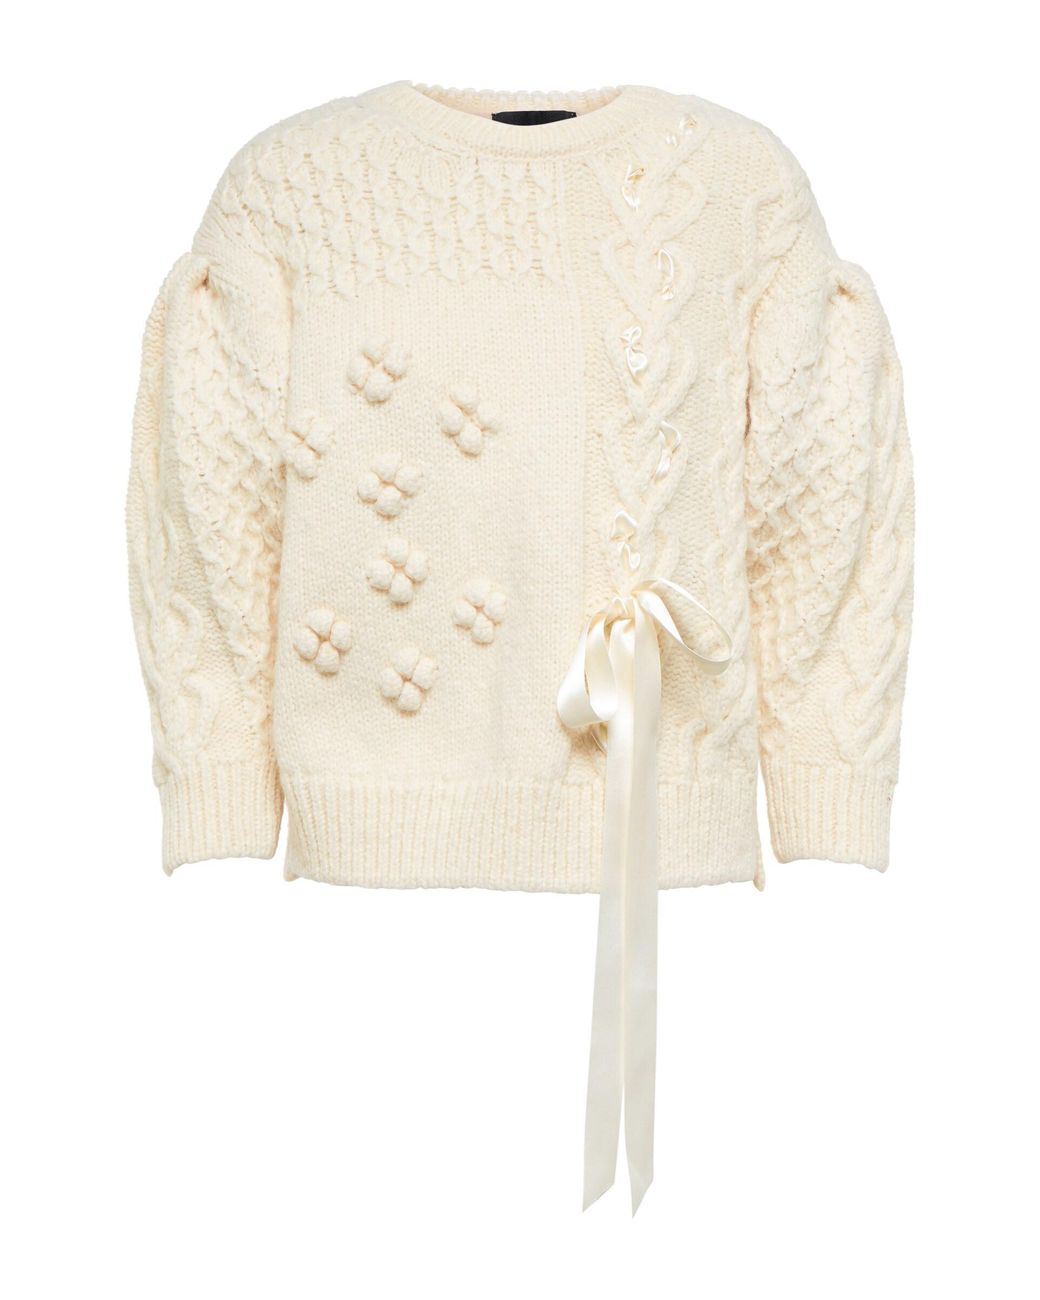 Simone Rocha Bow-embellished Knit Sweater in White | Lyst